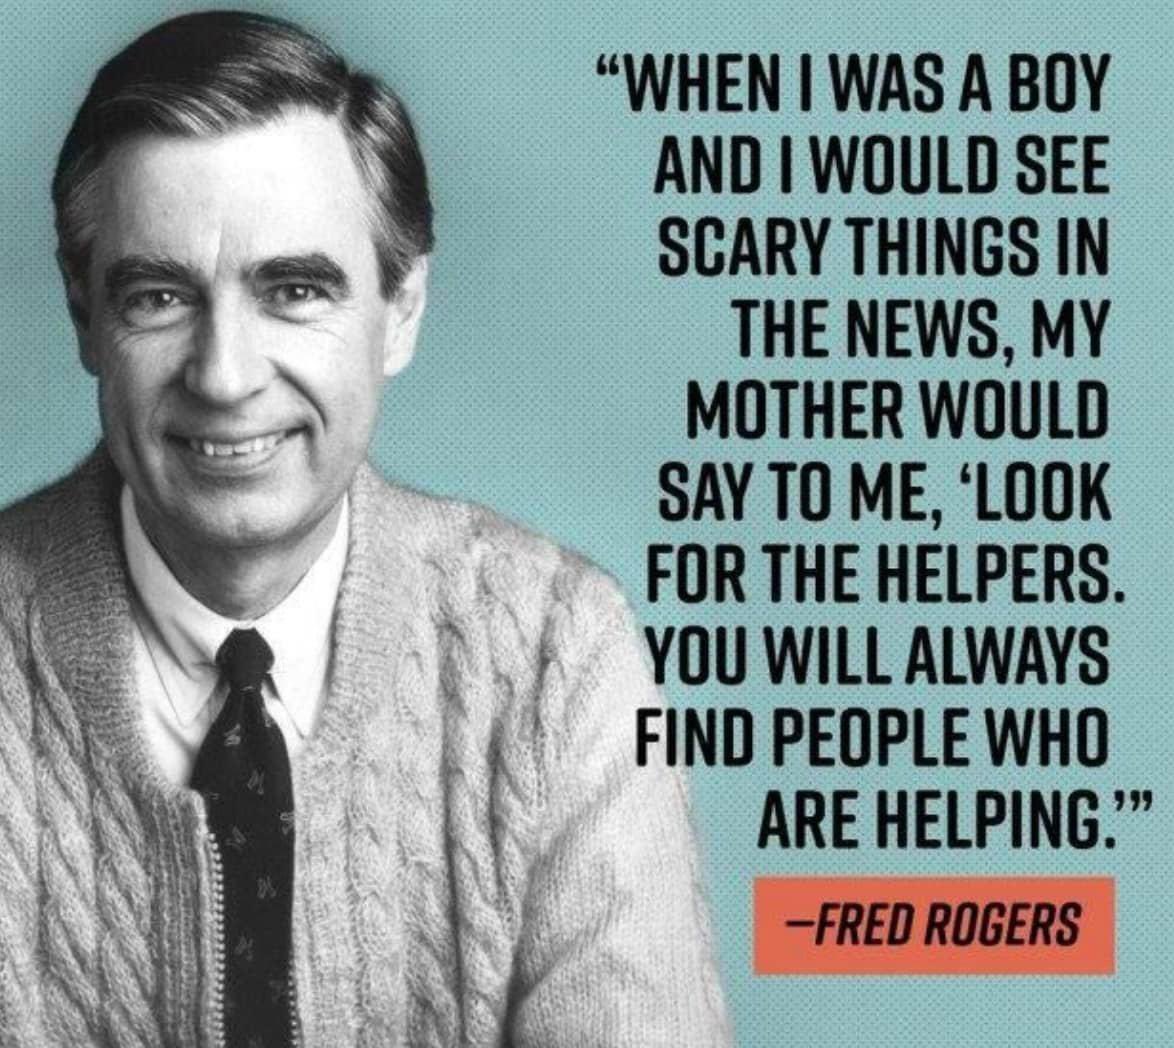 Comforting words from a Pittsburgh legend, who passed on this day in 2003 #fredrogers #misterrogers 💙